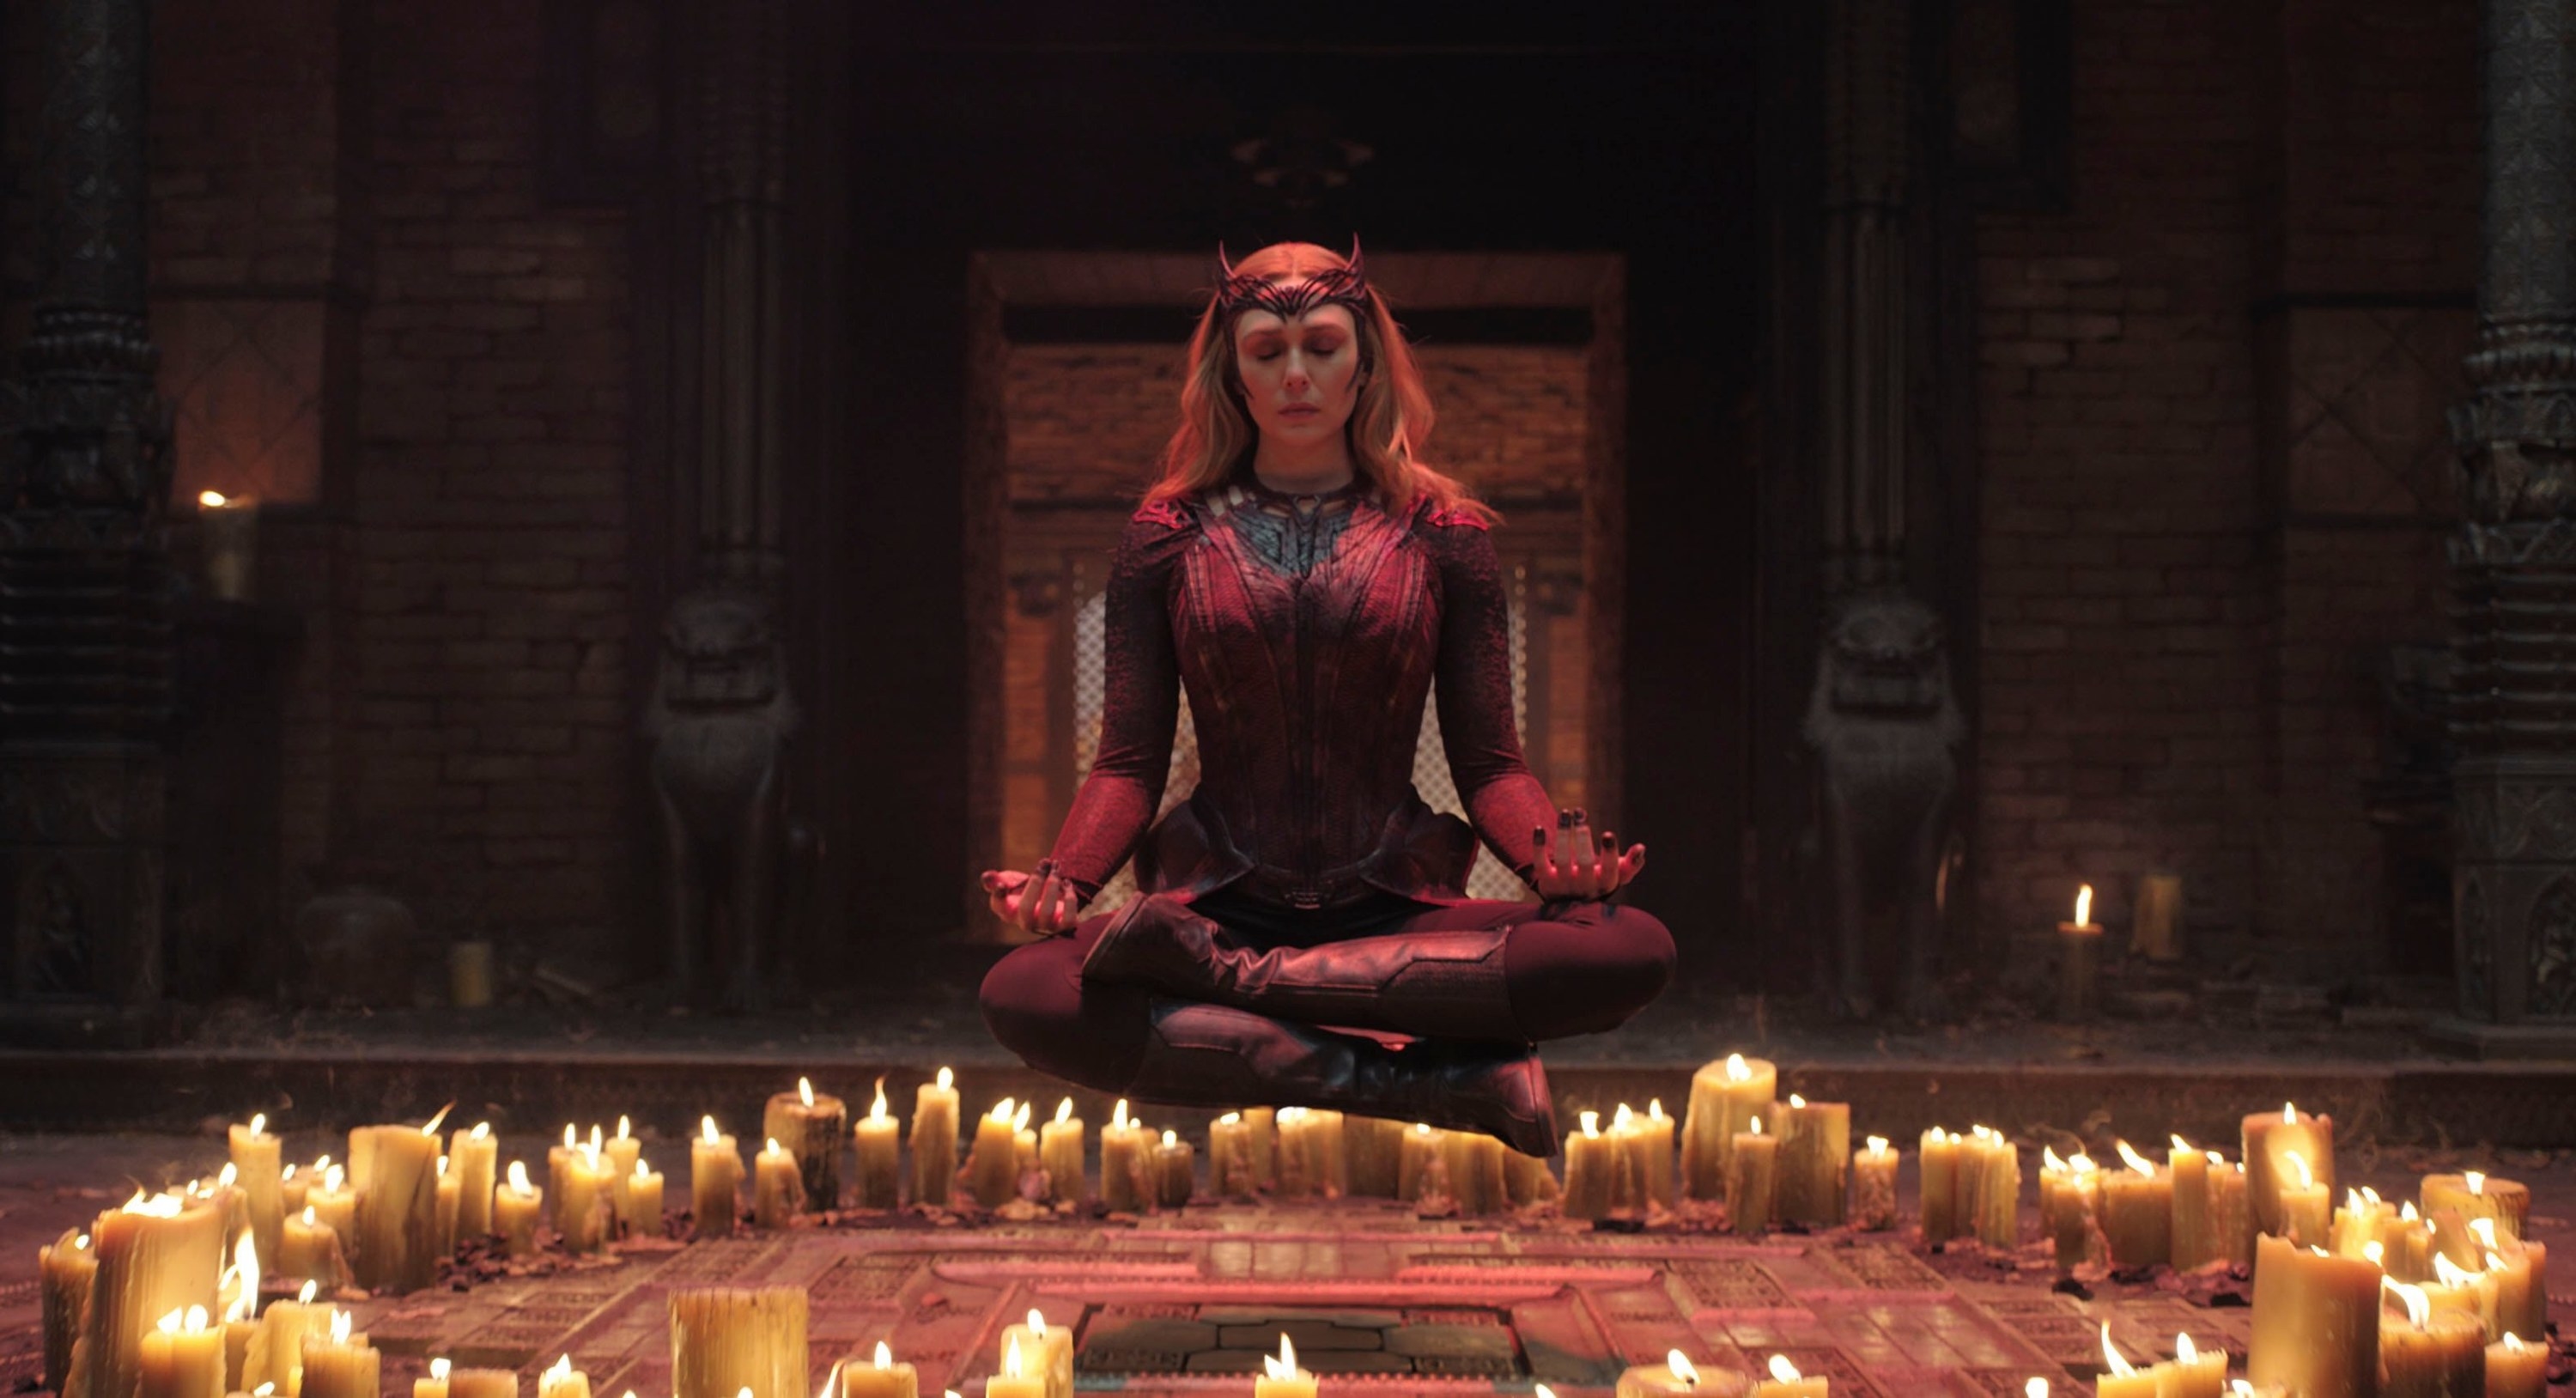 Wanda floating in a circle of candles in Doctor Strange in the Multiverse of Madness